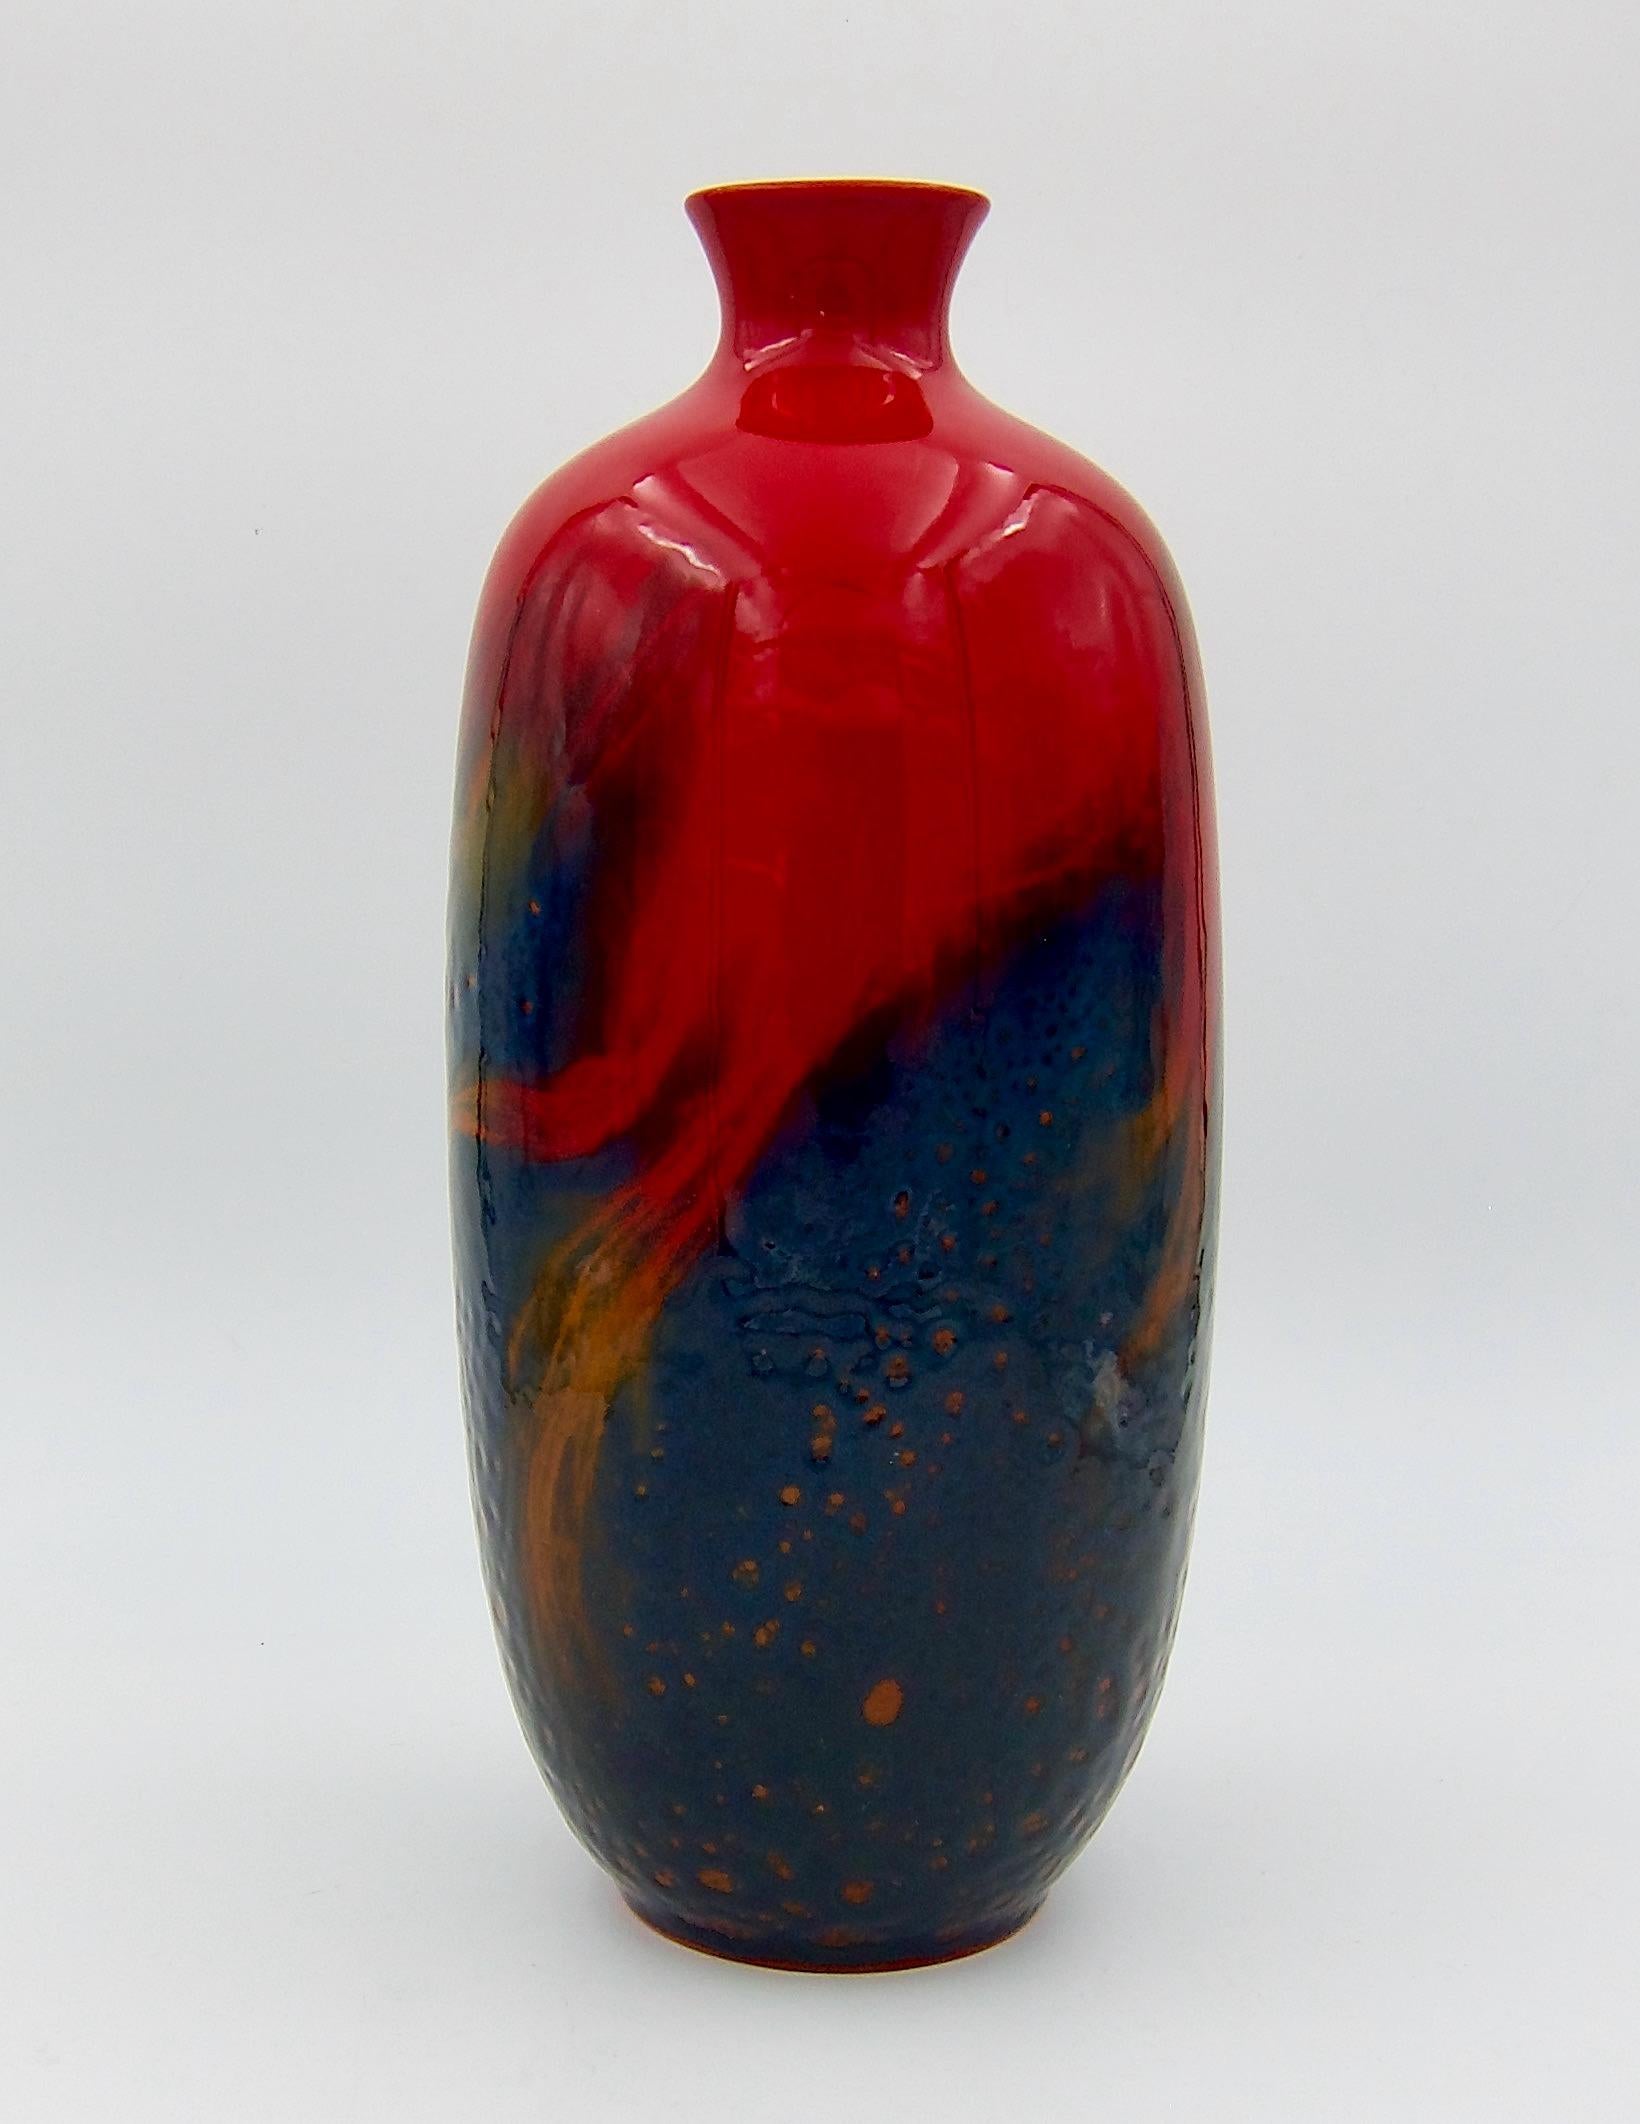 Large Royal Doulton Red Flambe Vase from the Art Deco Period 1